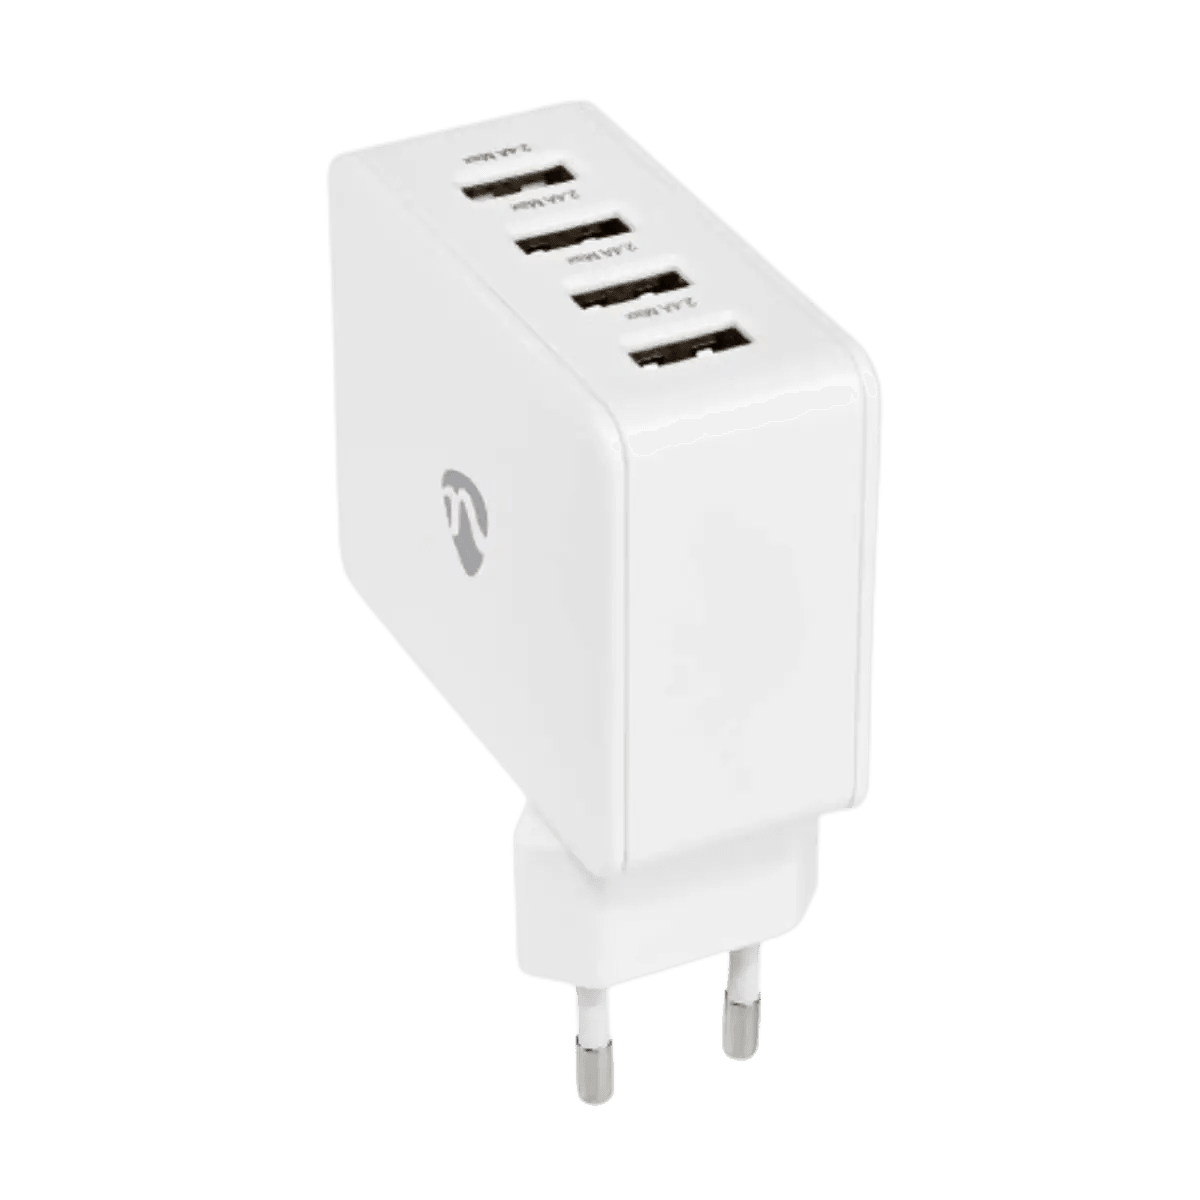 Chargeur mural 4x USB 24W